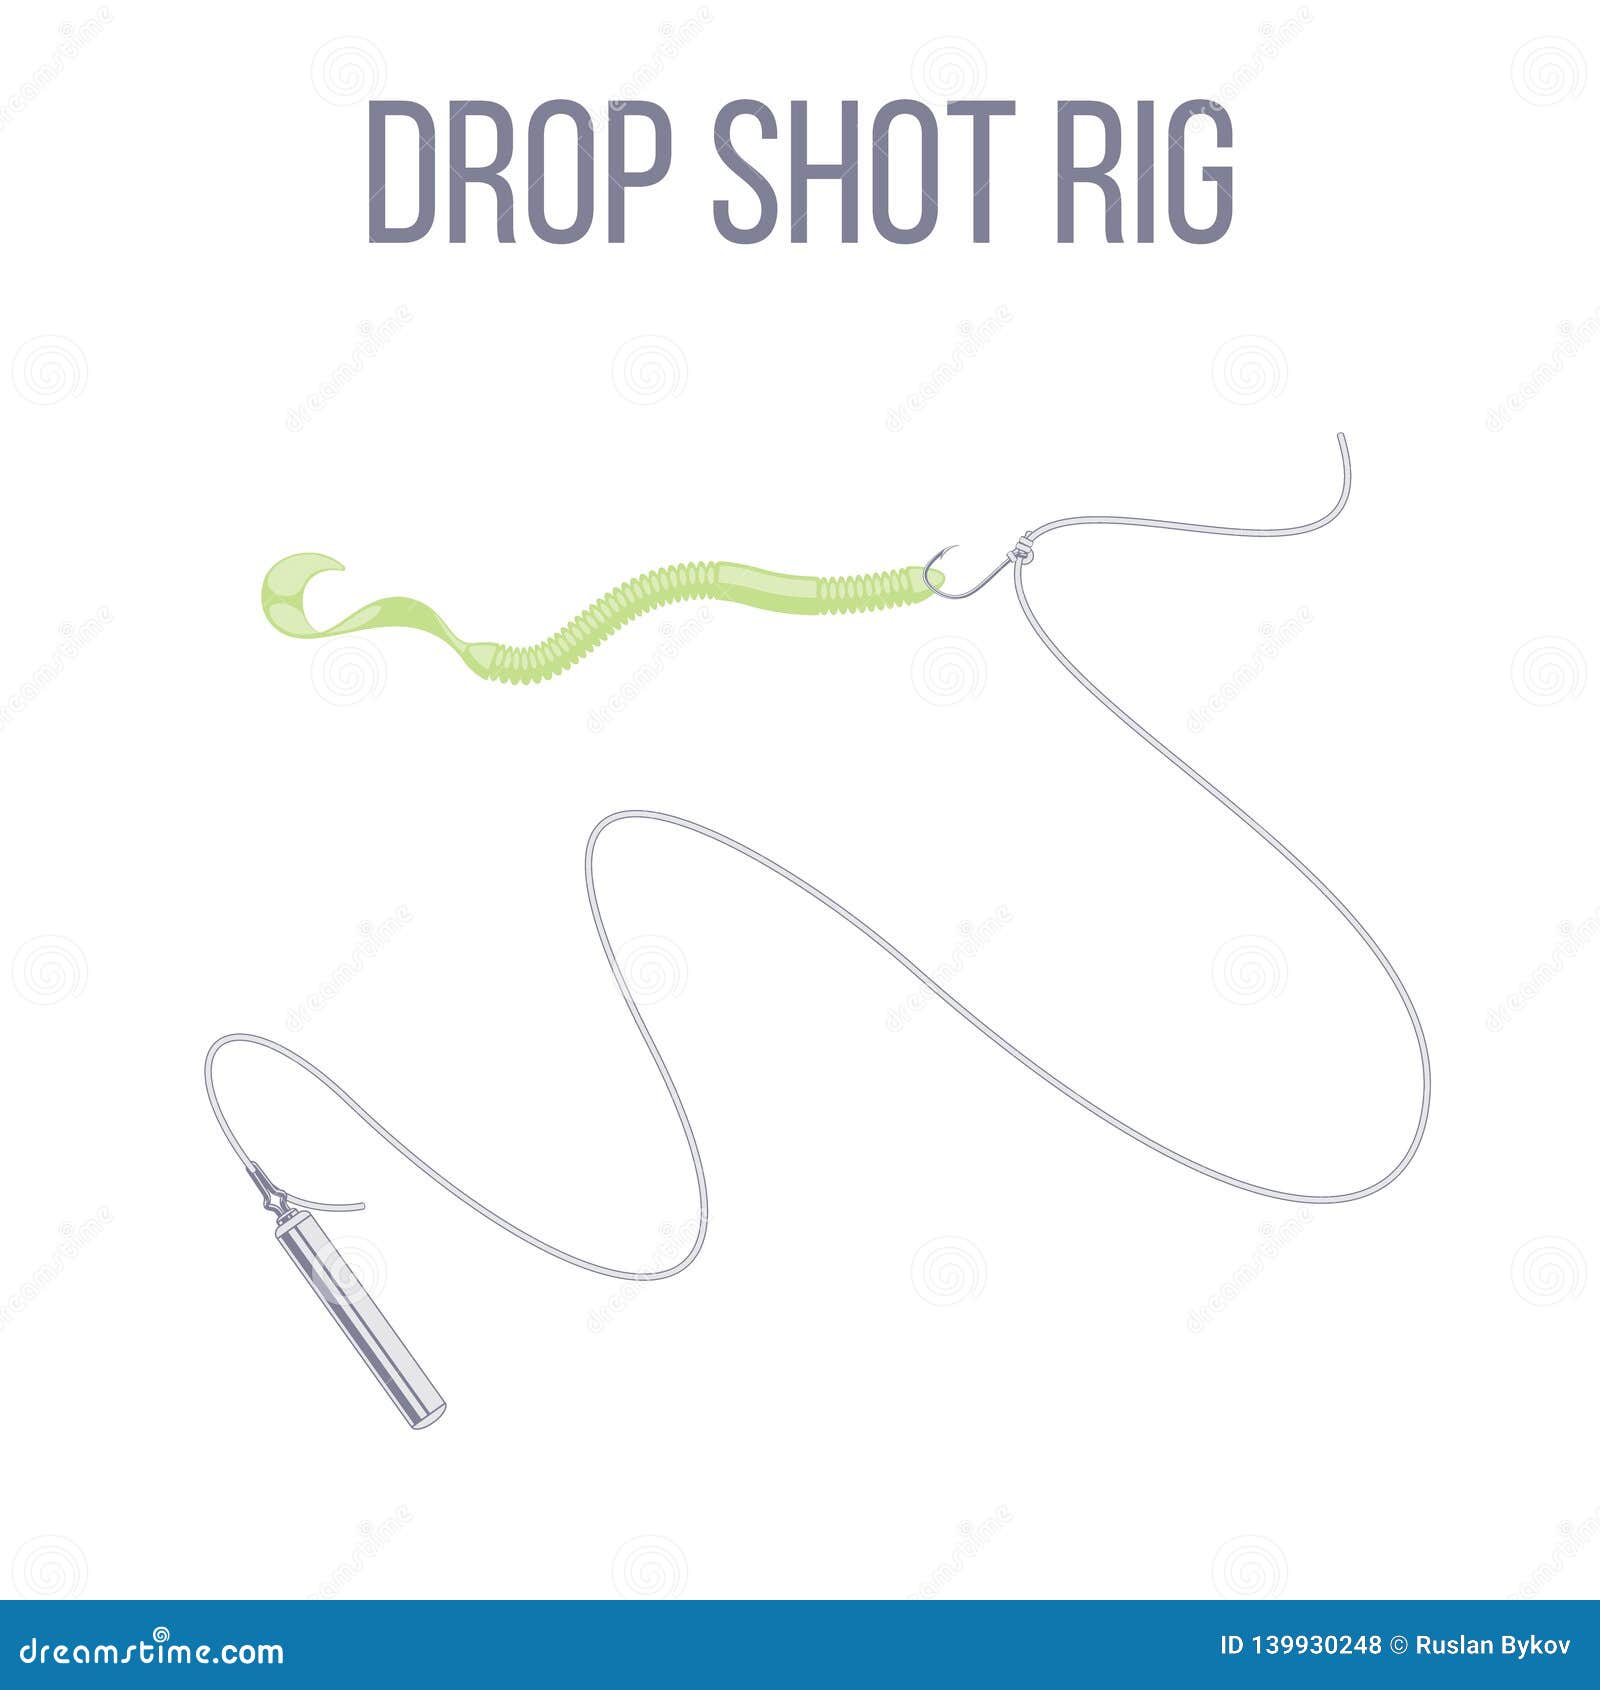 drop shot rig with stick sinker and soft plastic lure worm bait setup.